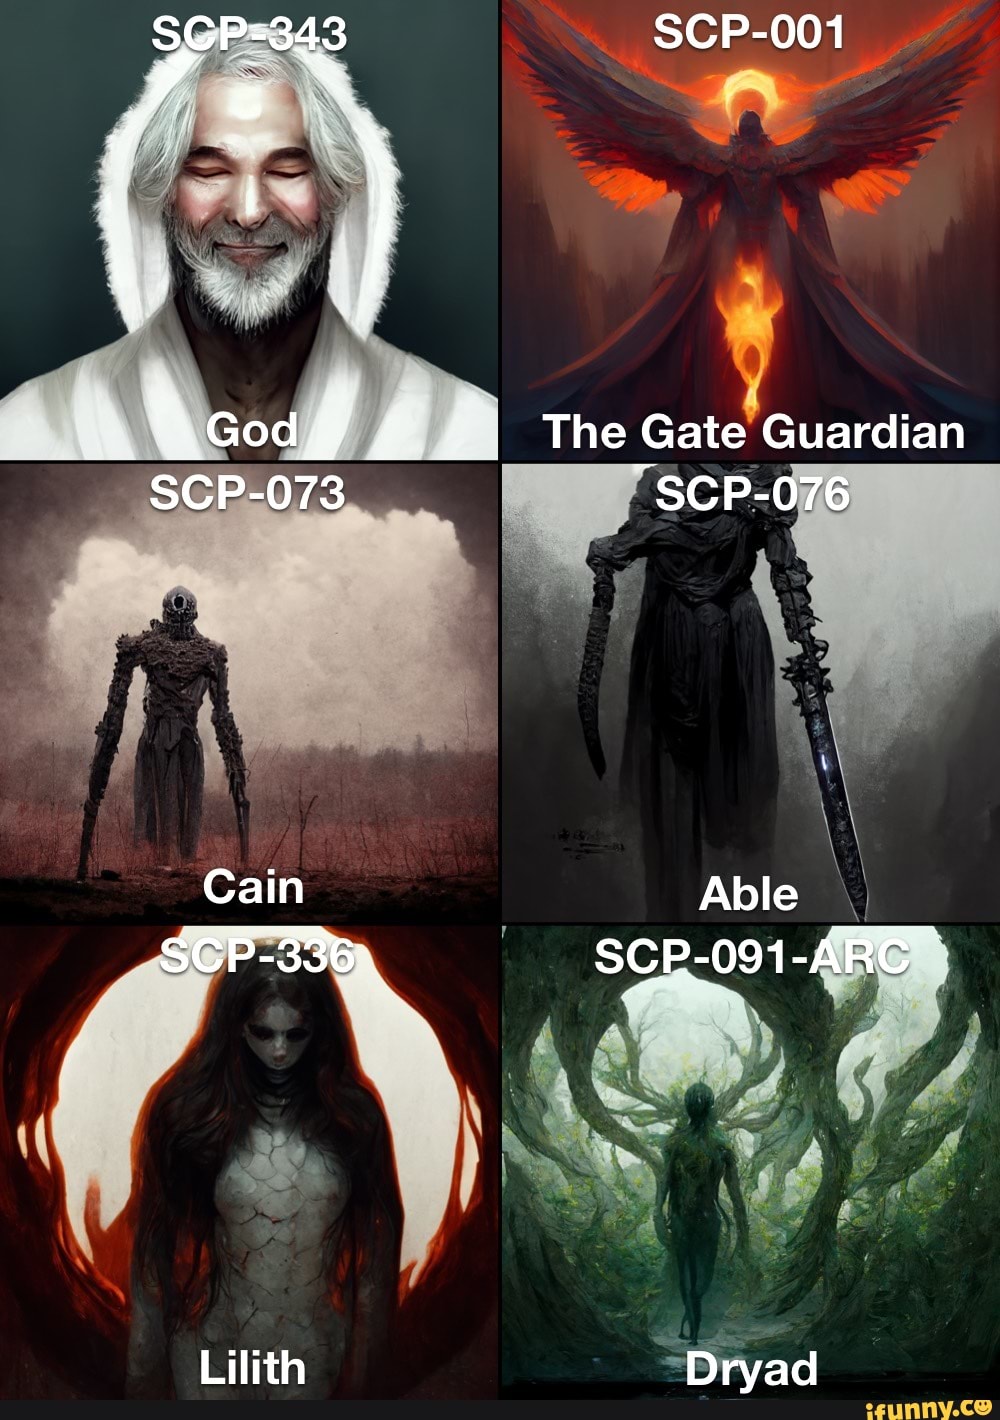 SCP-343 SCP-001 God The Gate Guardian SCP-073 Abel Cain SCP-336 ~ SCP-6000-A  Lilith The Serpent SCP-089 SCP-1348 Tophet The Inner Sanctum - iFunny Brazil